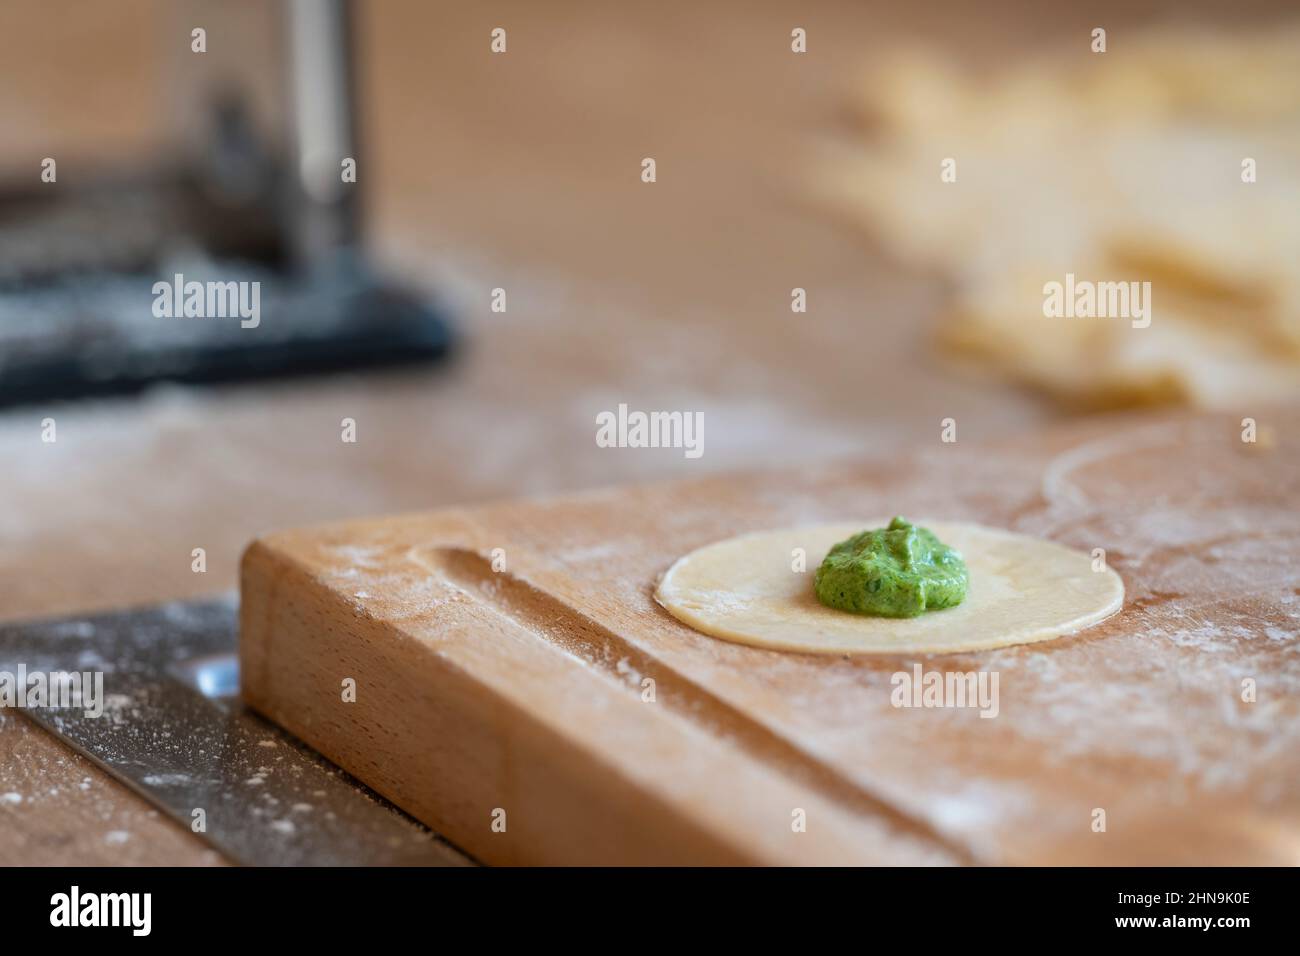 round baking dish with portion of spinach mass for original tyrolean dumplings schlutzkrapfen in kitchen with wooden board full of flour Stock Photo